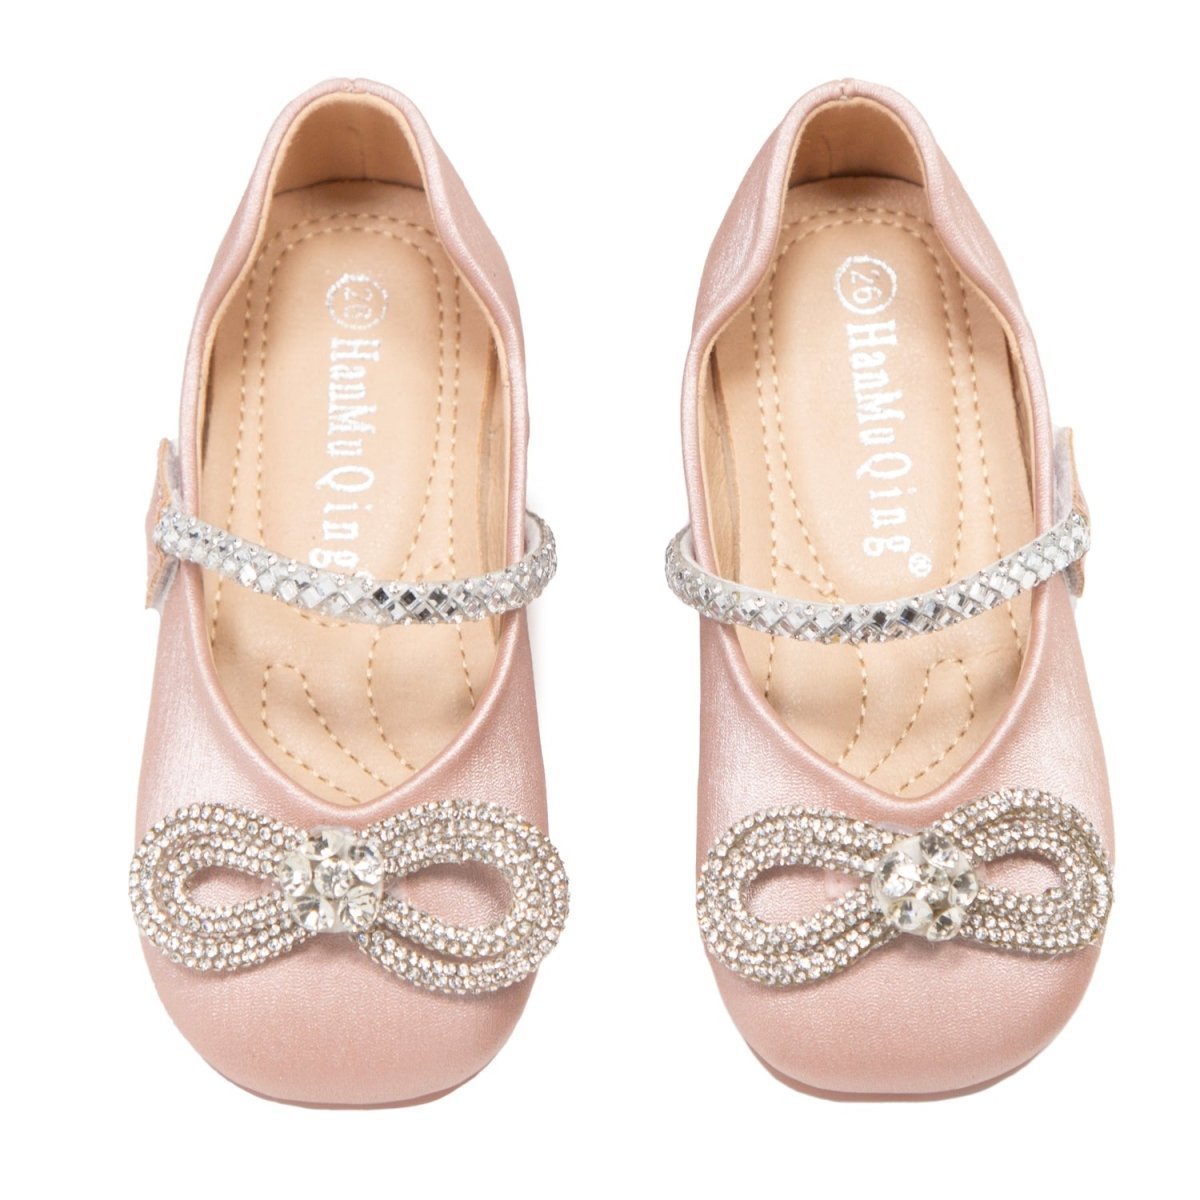 MACH CRYSTAL BOW SHOES - FLATS